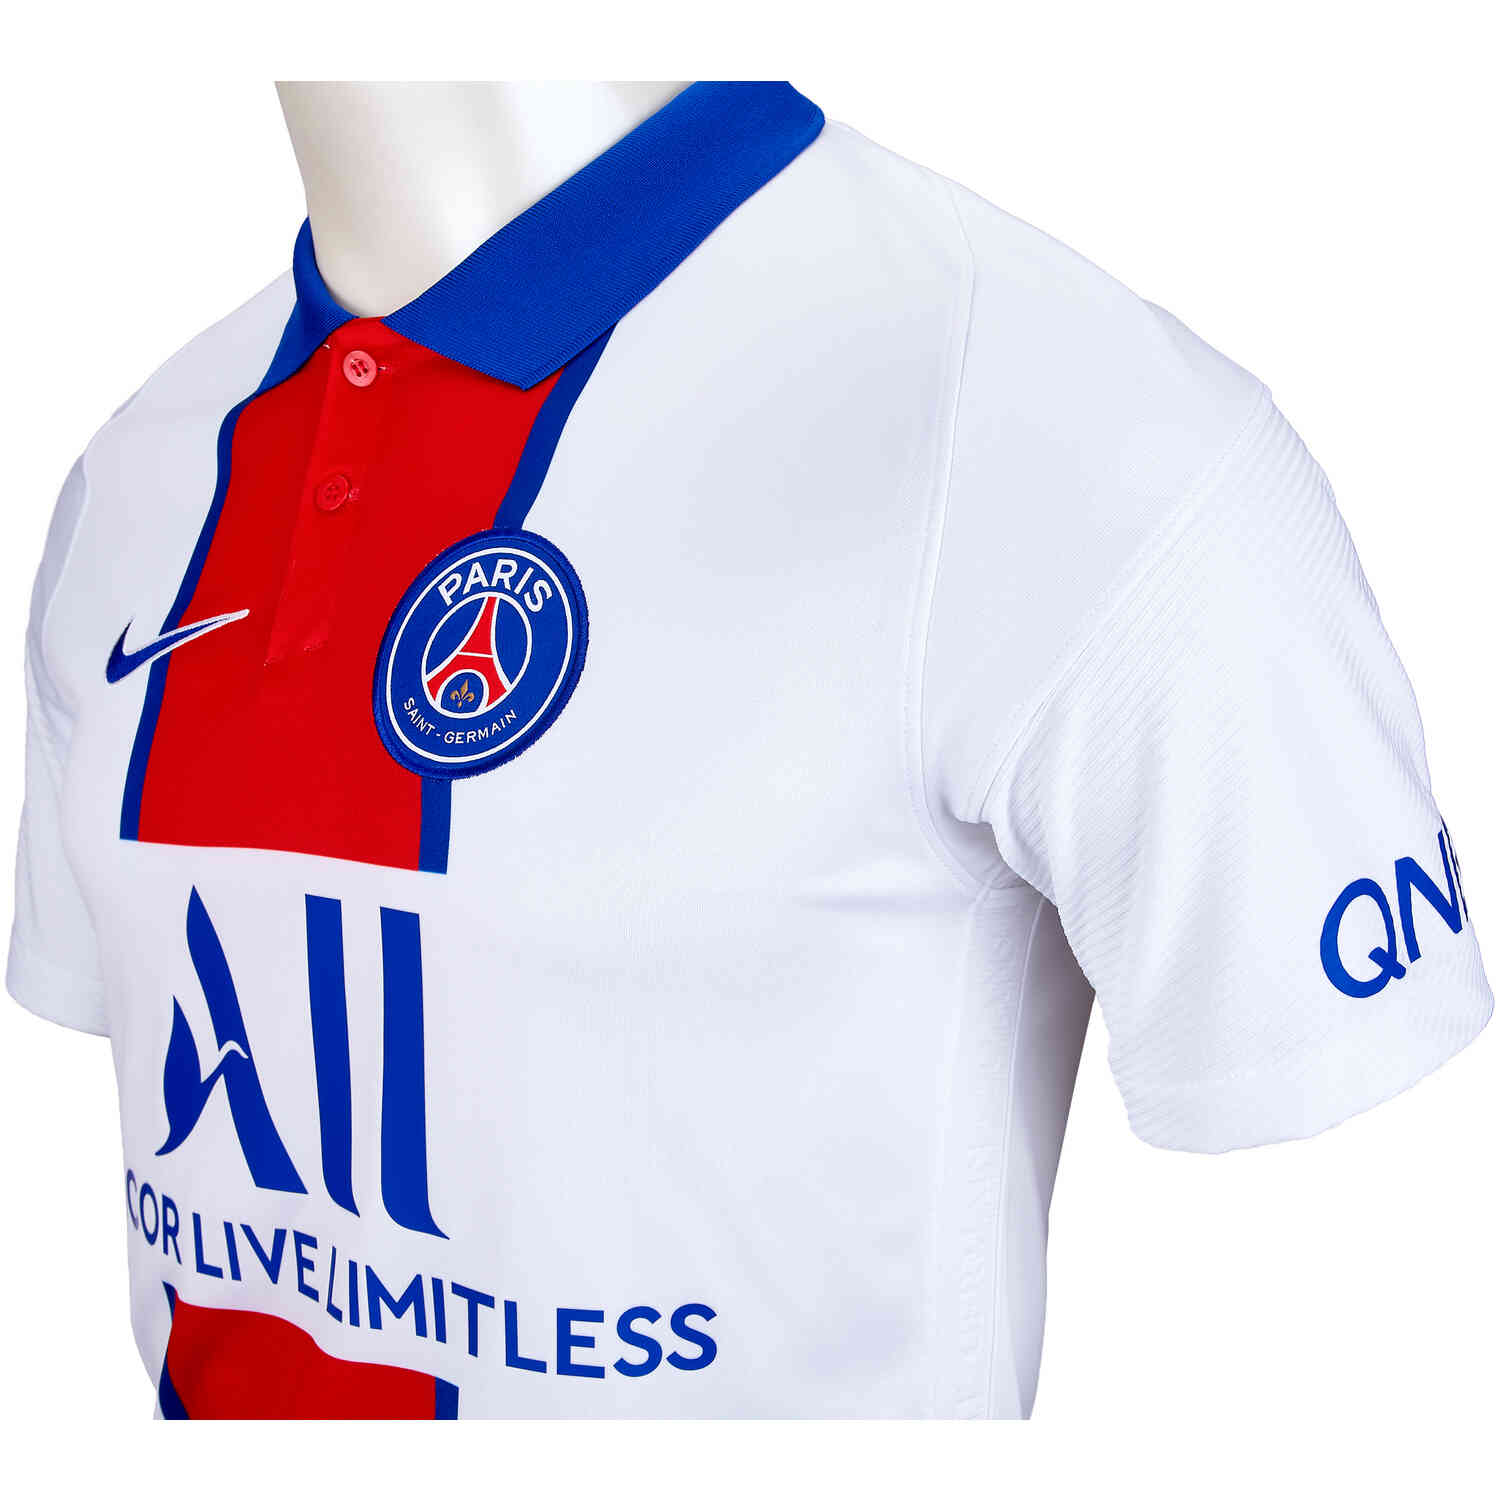 Dodich59472 Seriously! 36+ Reasons for Psg Away Jersey 2020/21? The